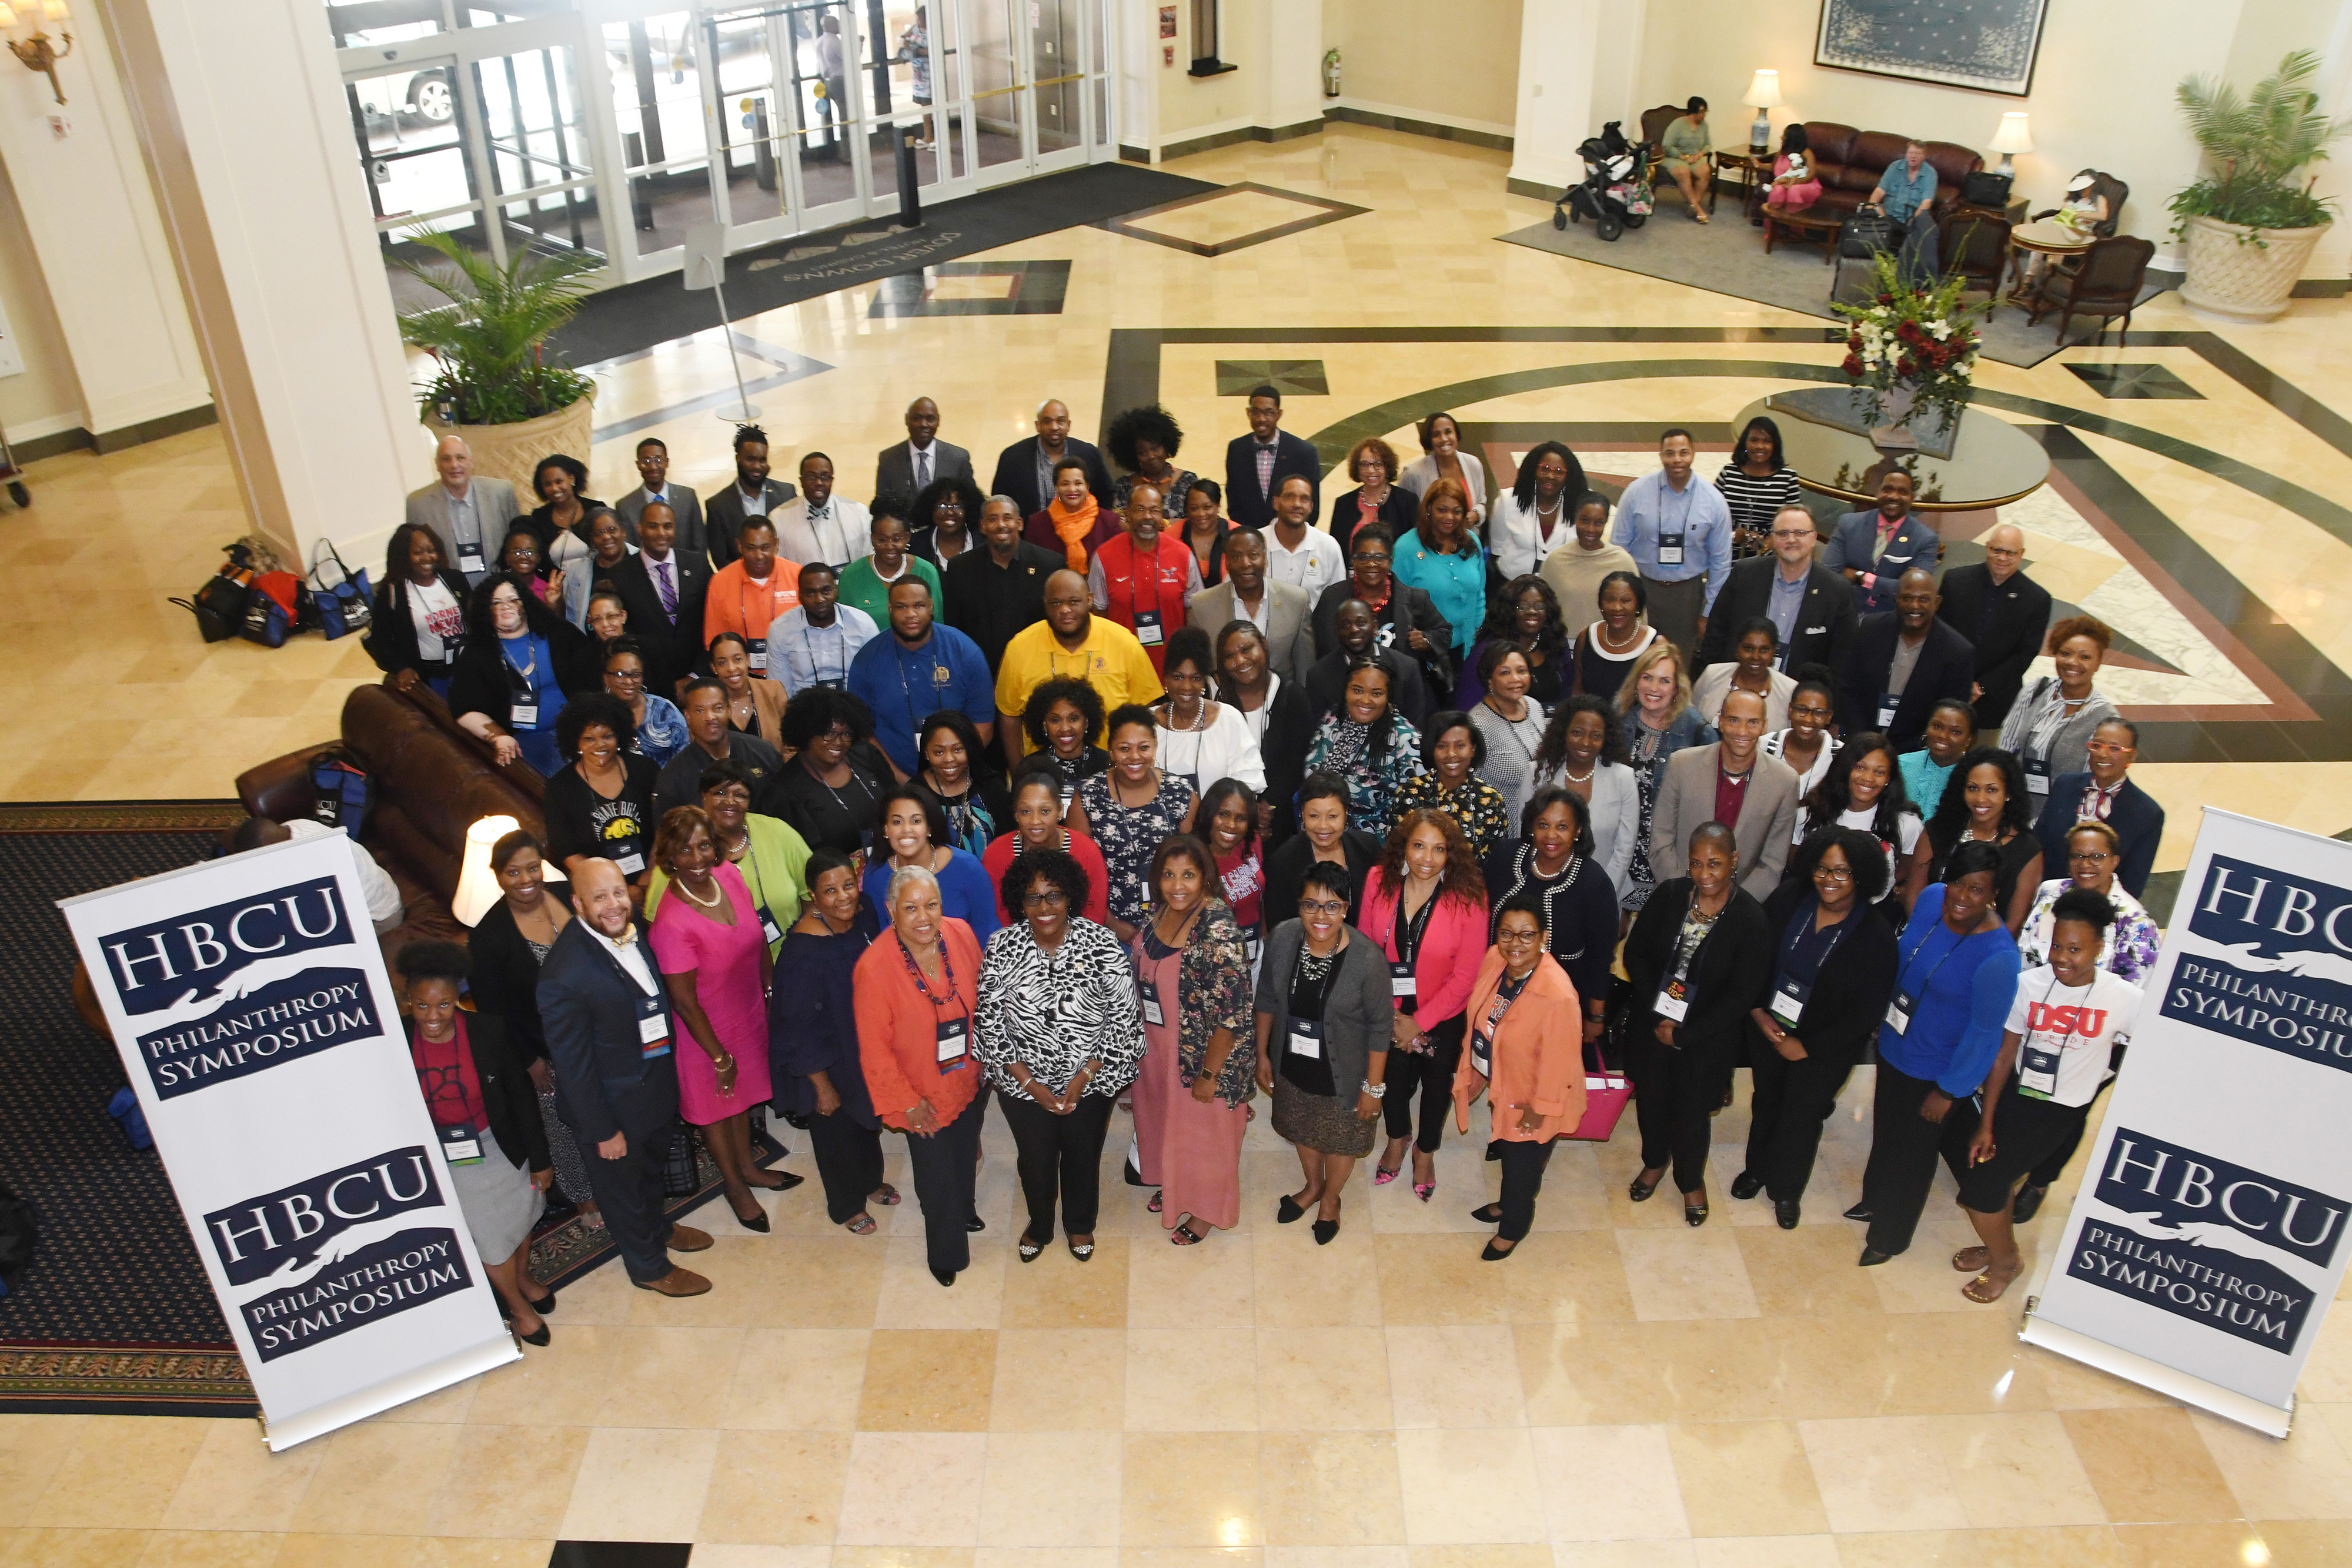 Forty-two Historically Black Colleges and Universities were represented among the participants in the 2018 HBCU Philanthropy Symposium.